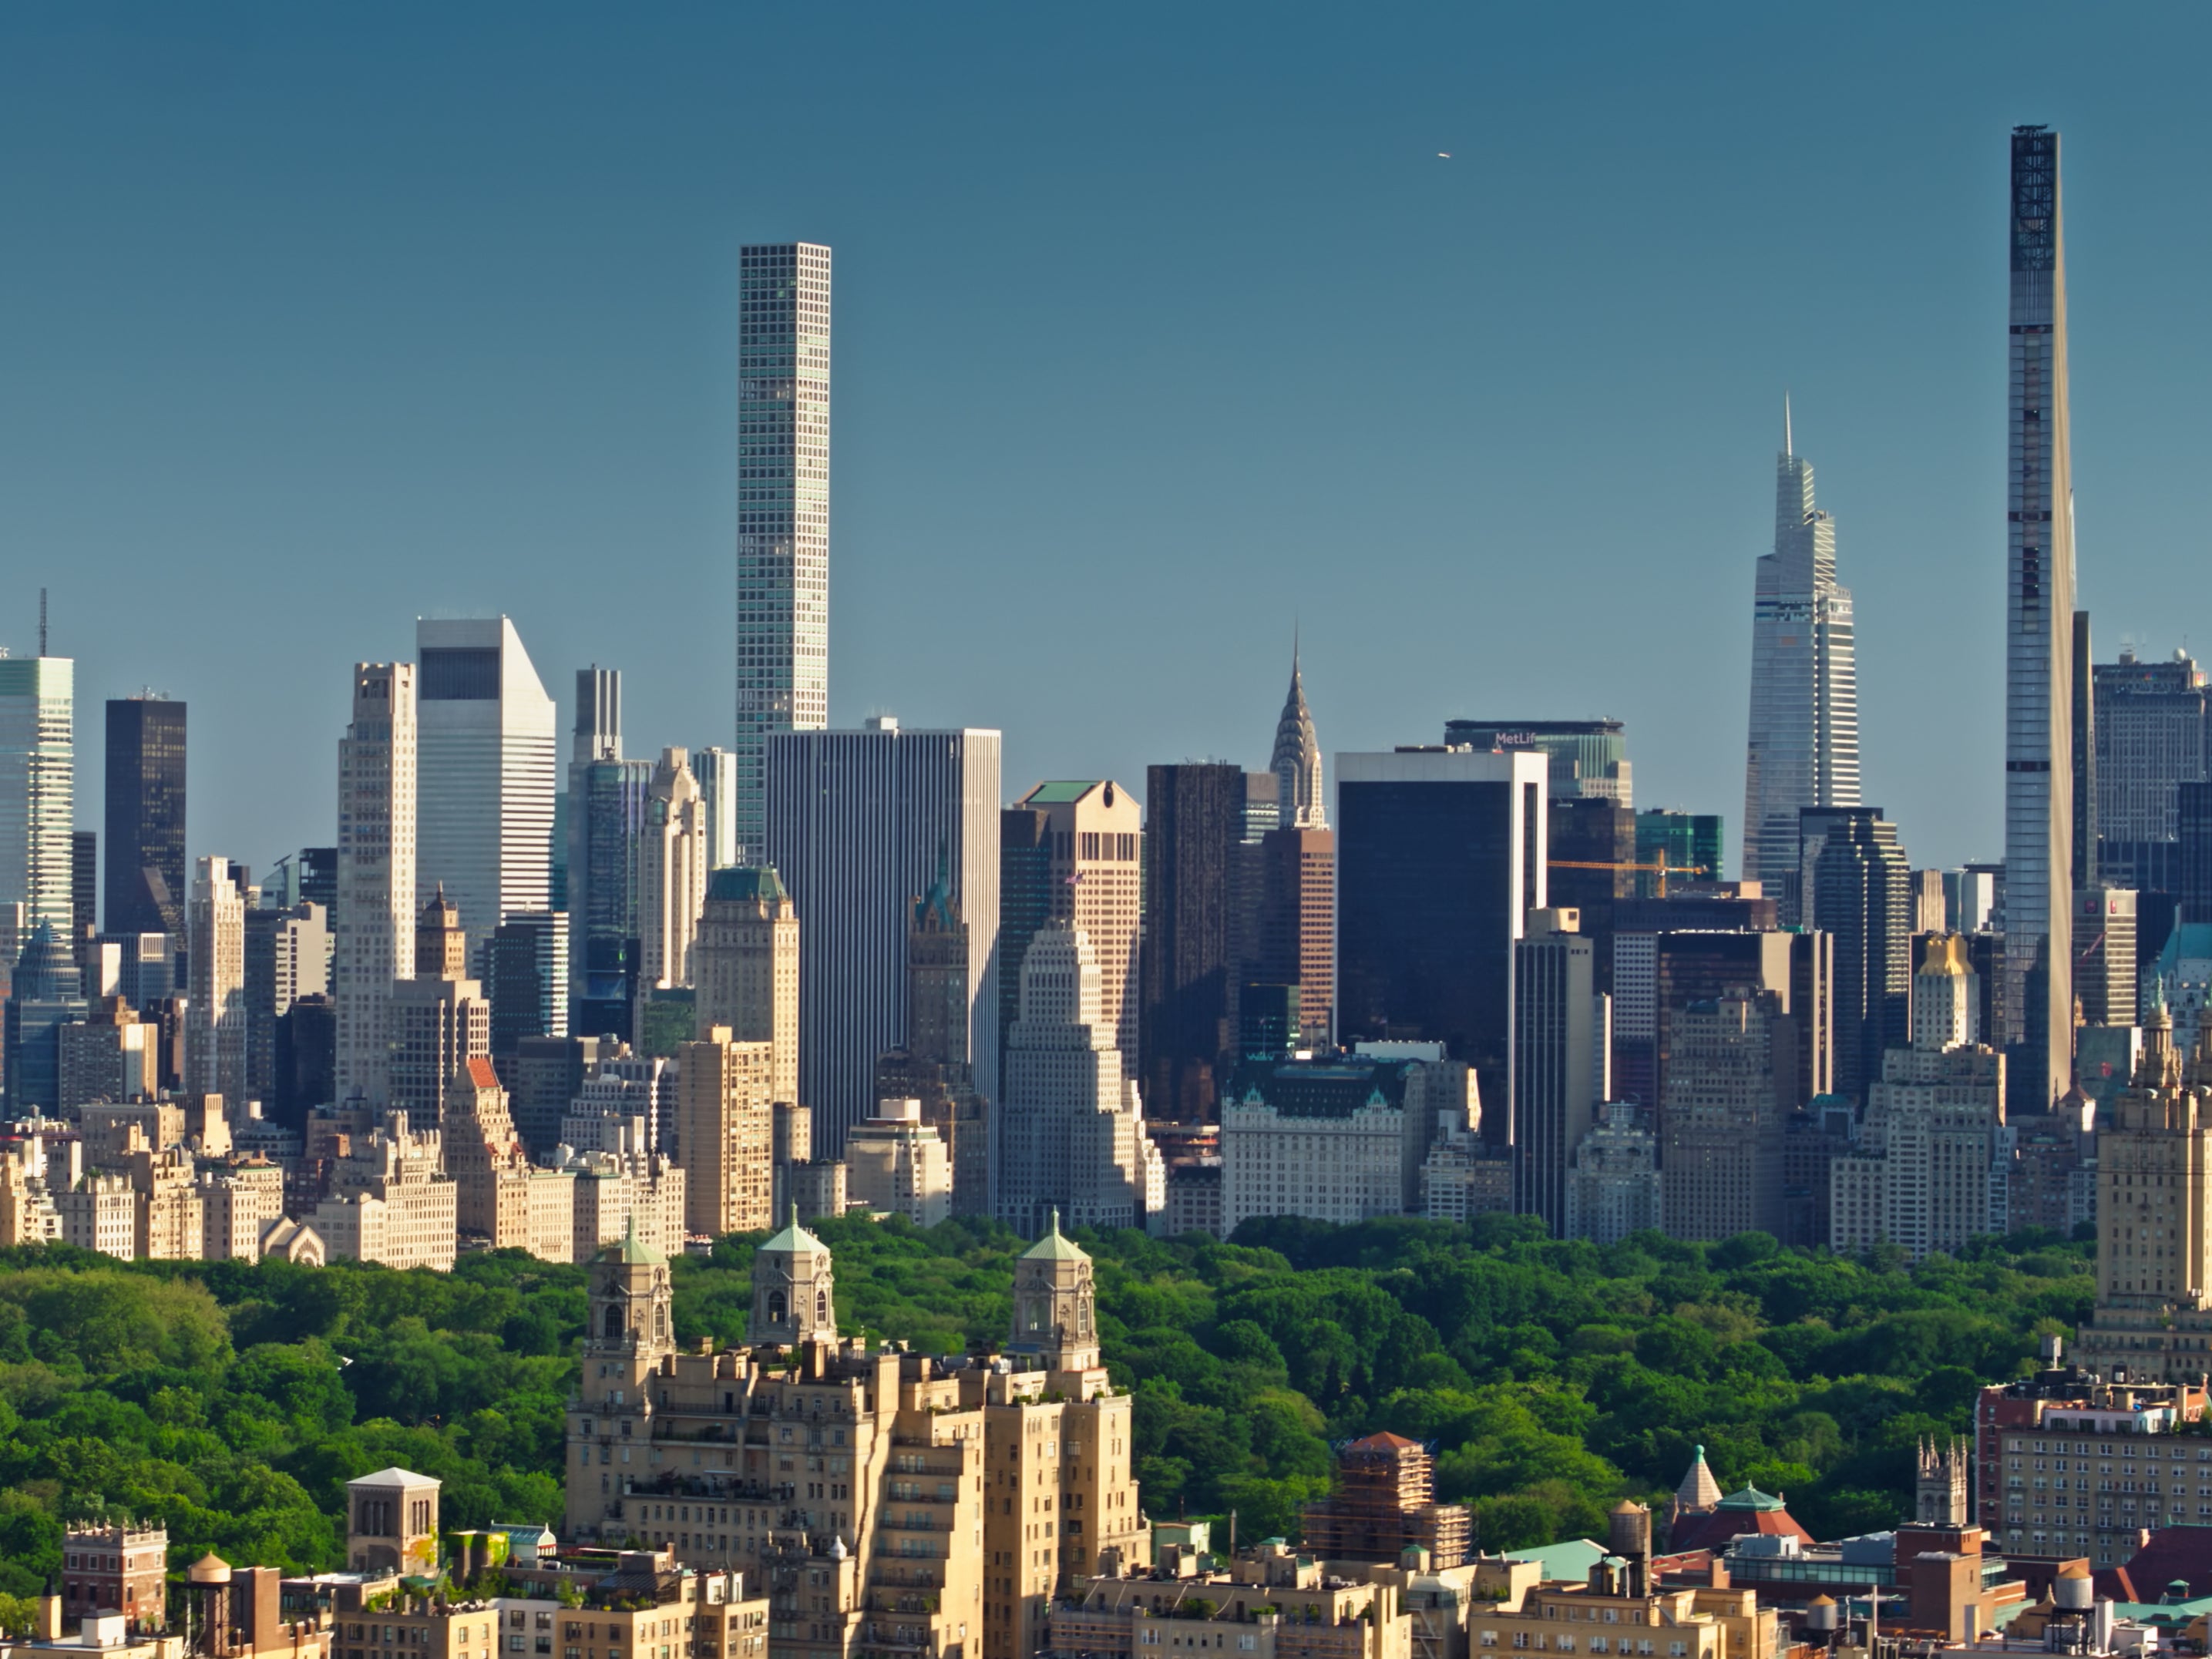 Midtown Manhattan and Central Park as seen from the Upper West Side. New York has overtake San Francisco as the US’s most expensive rental market